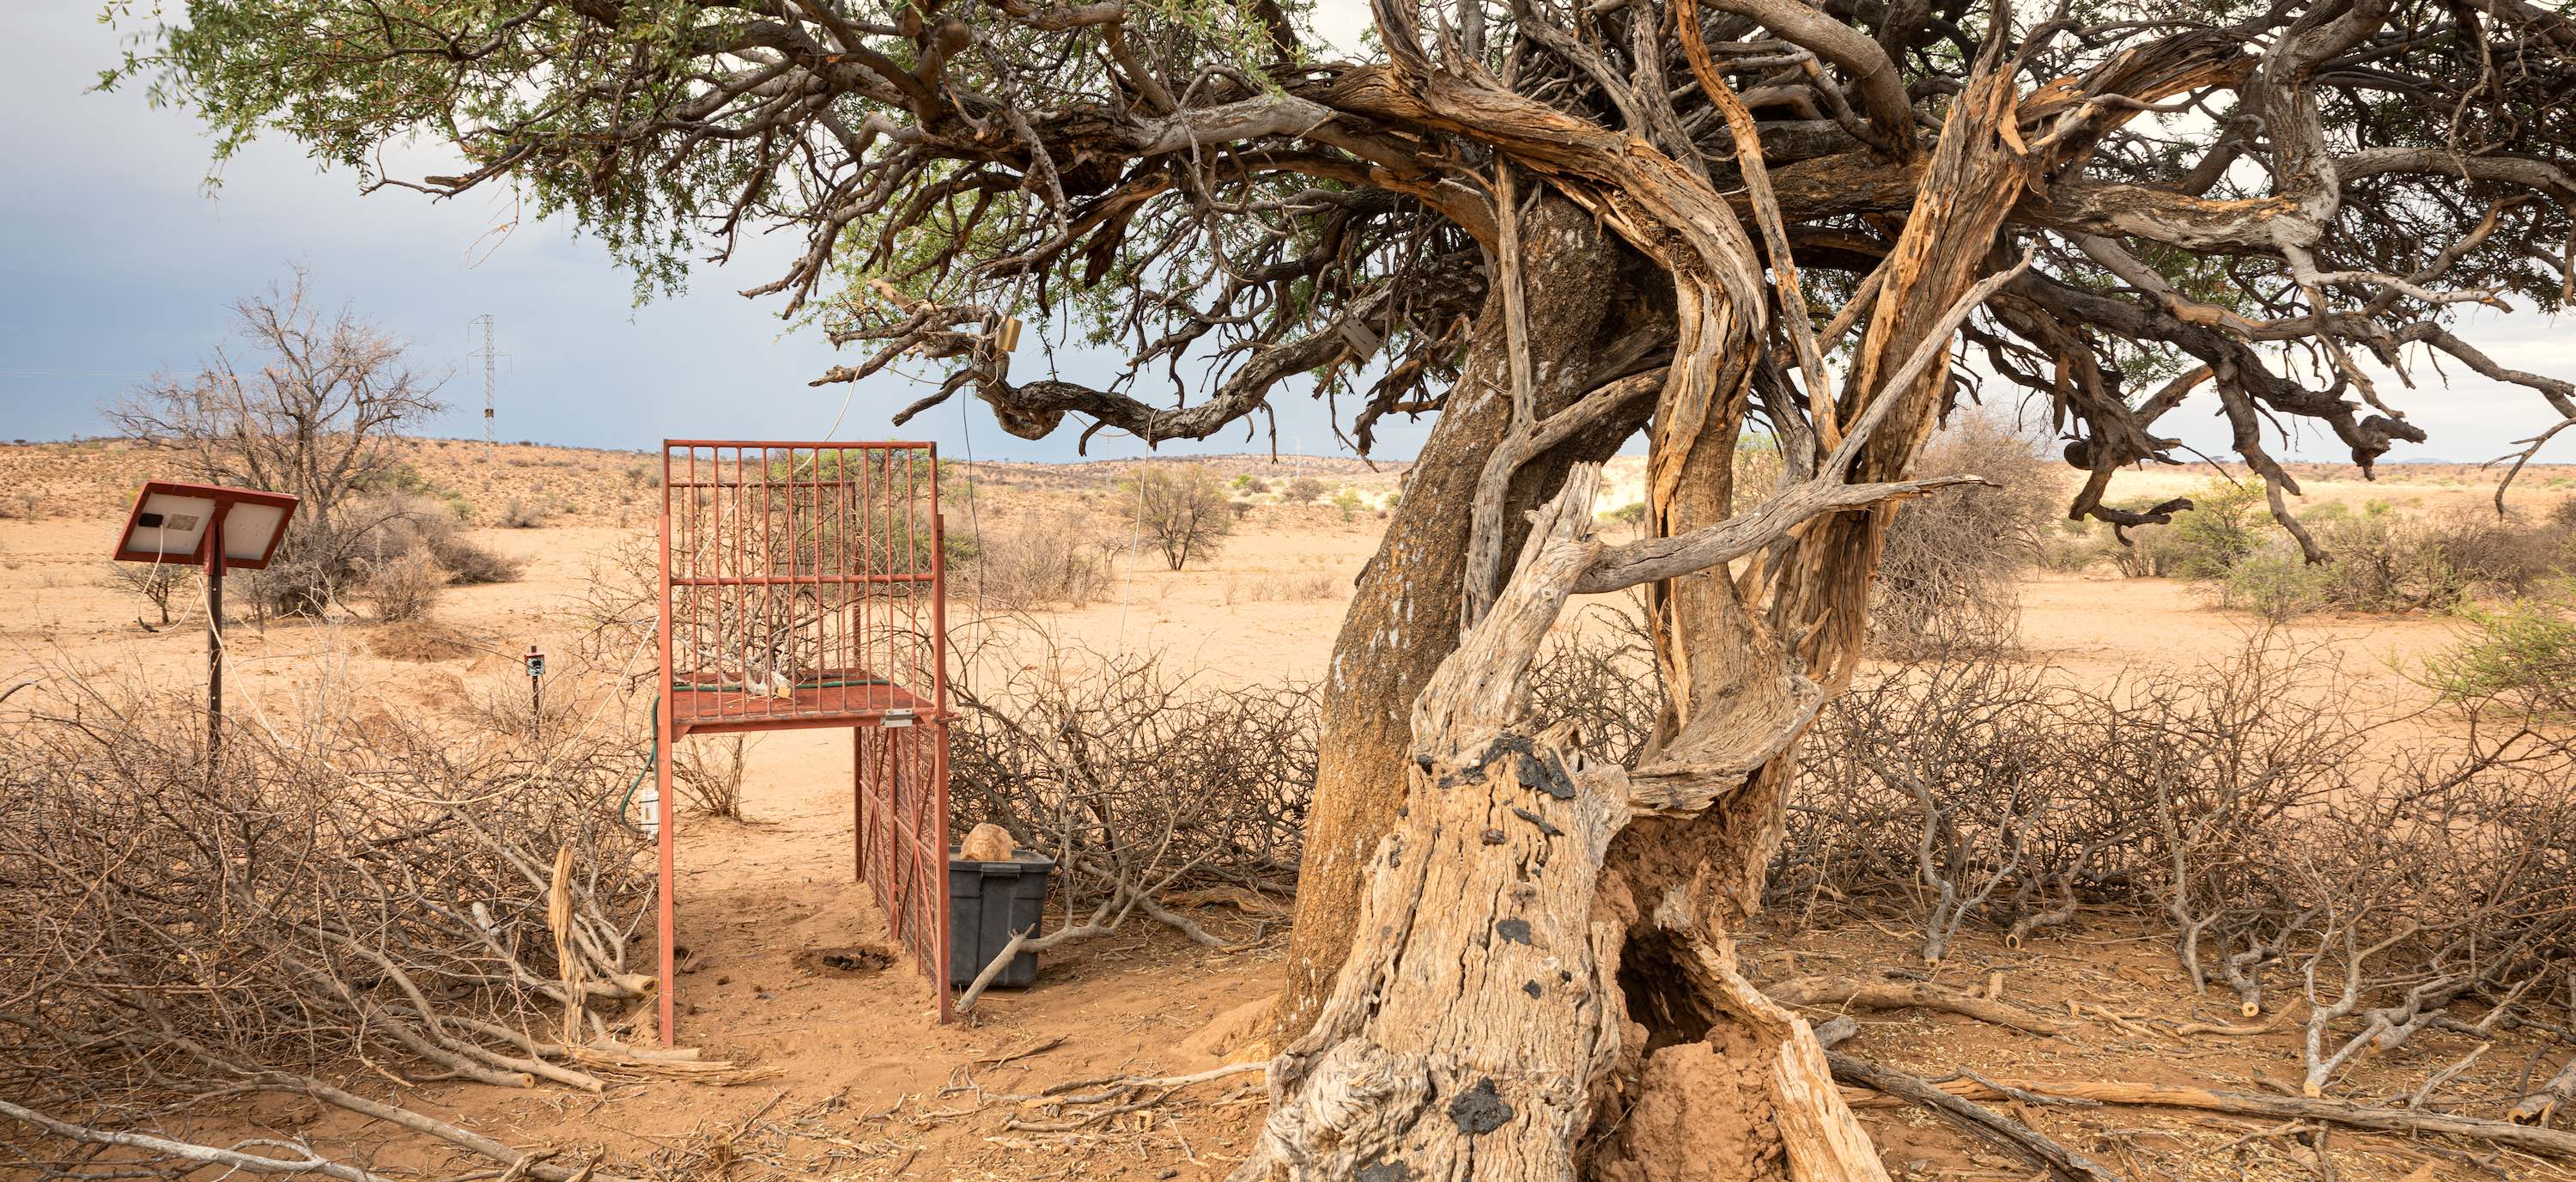 A cage trap under a tree.